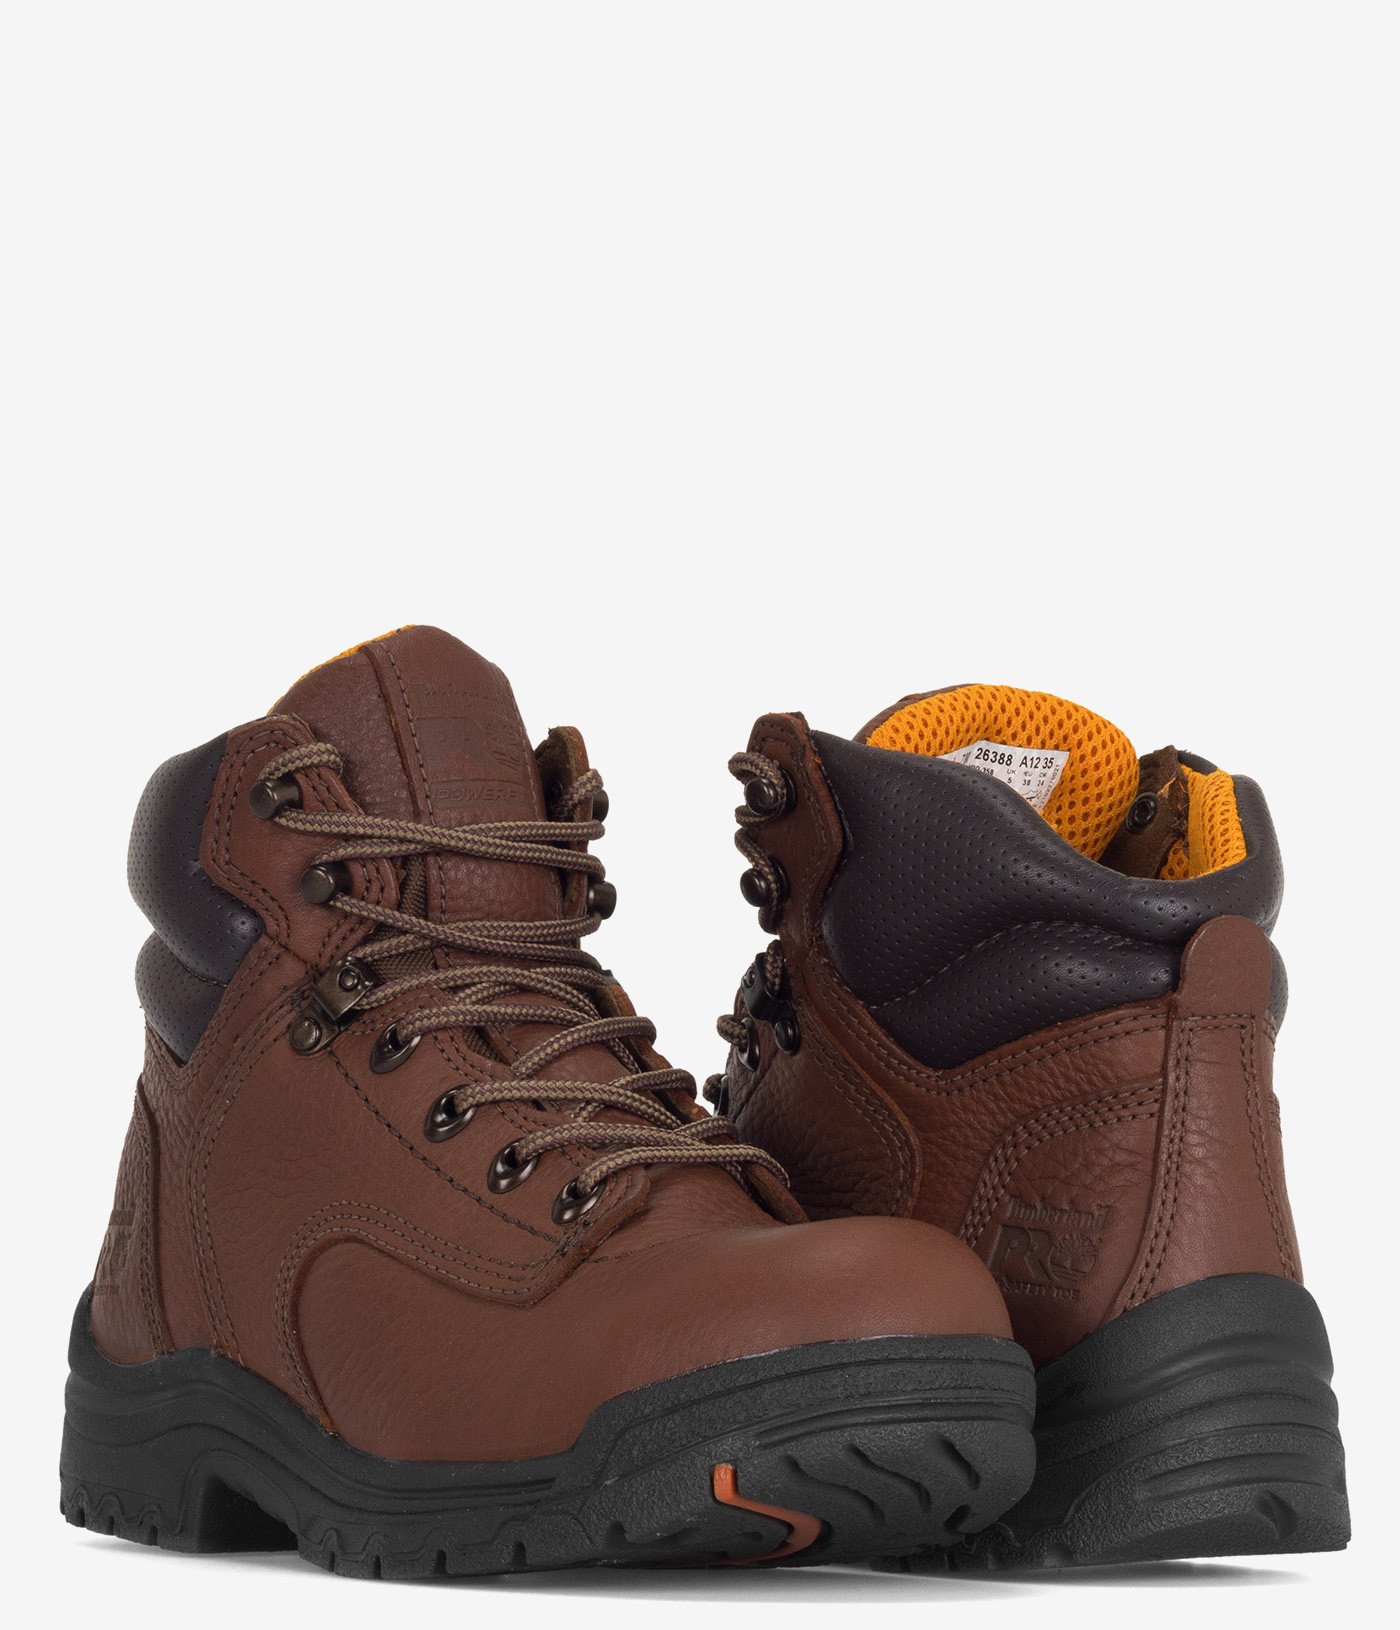 Timberland PRO Titan Alloy Safety Toe EH Work Boot